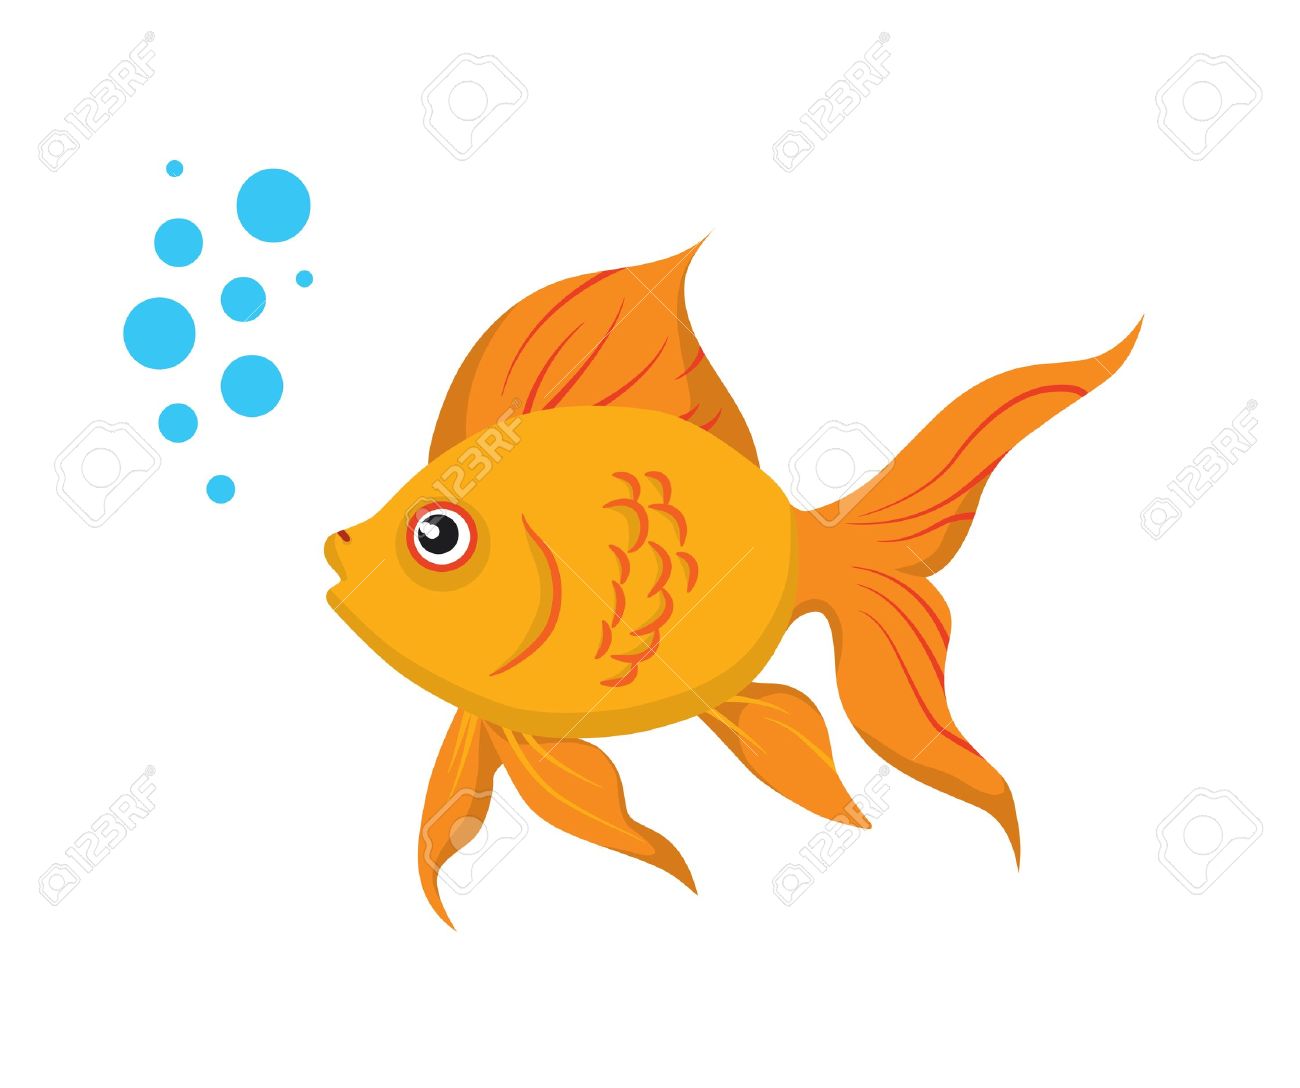 goldfish clipart black and wh